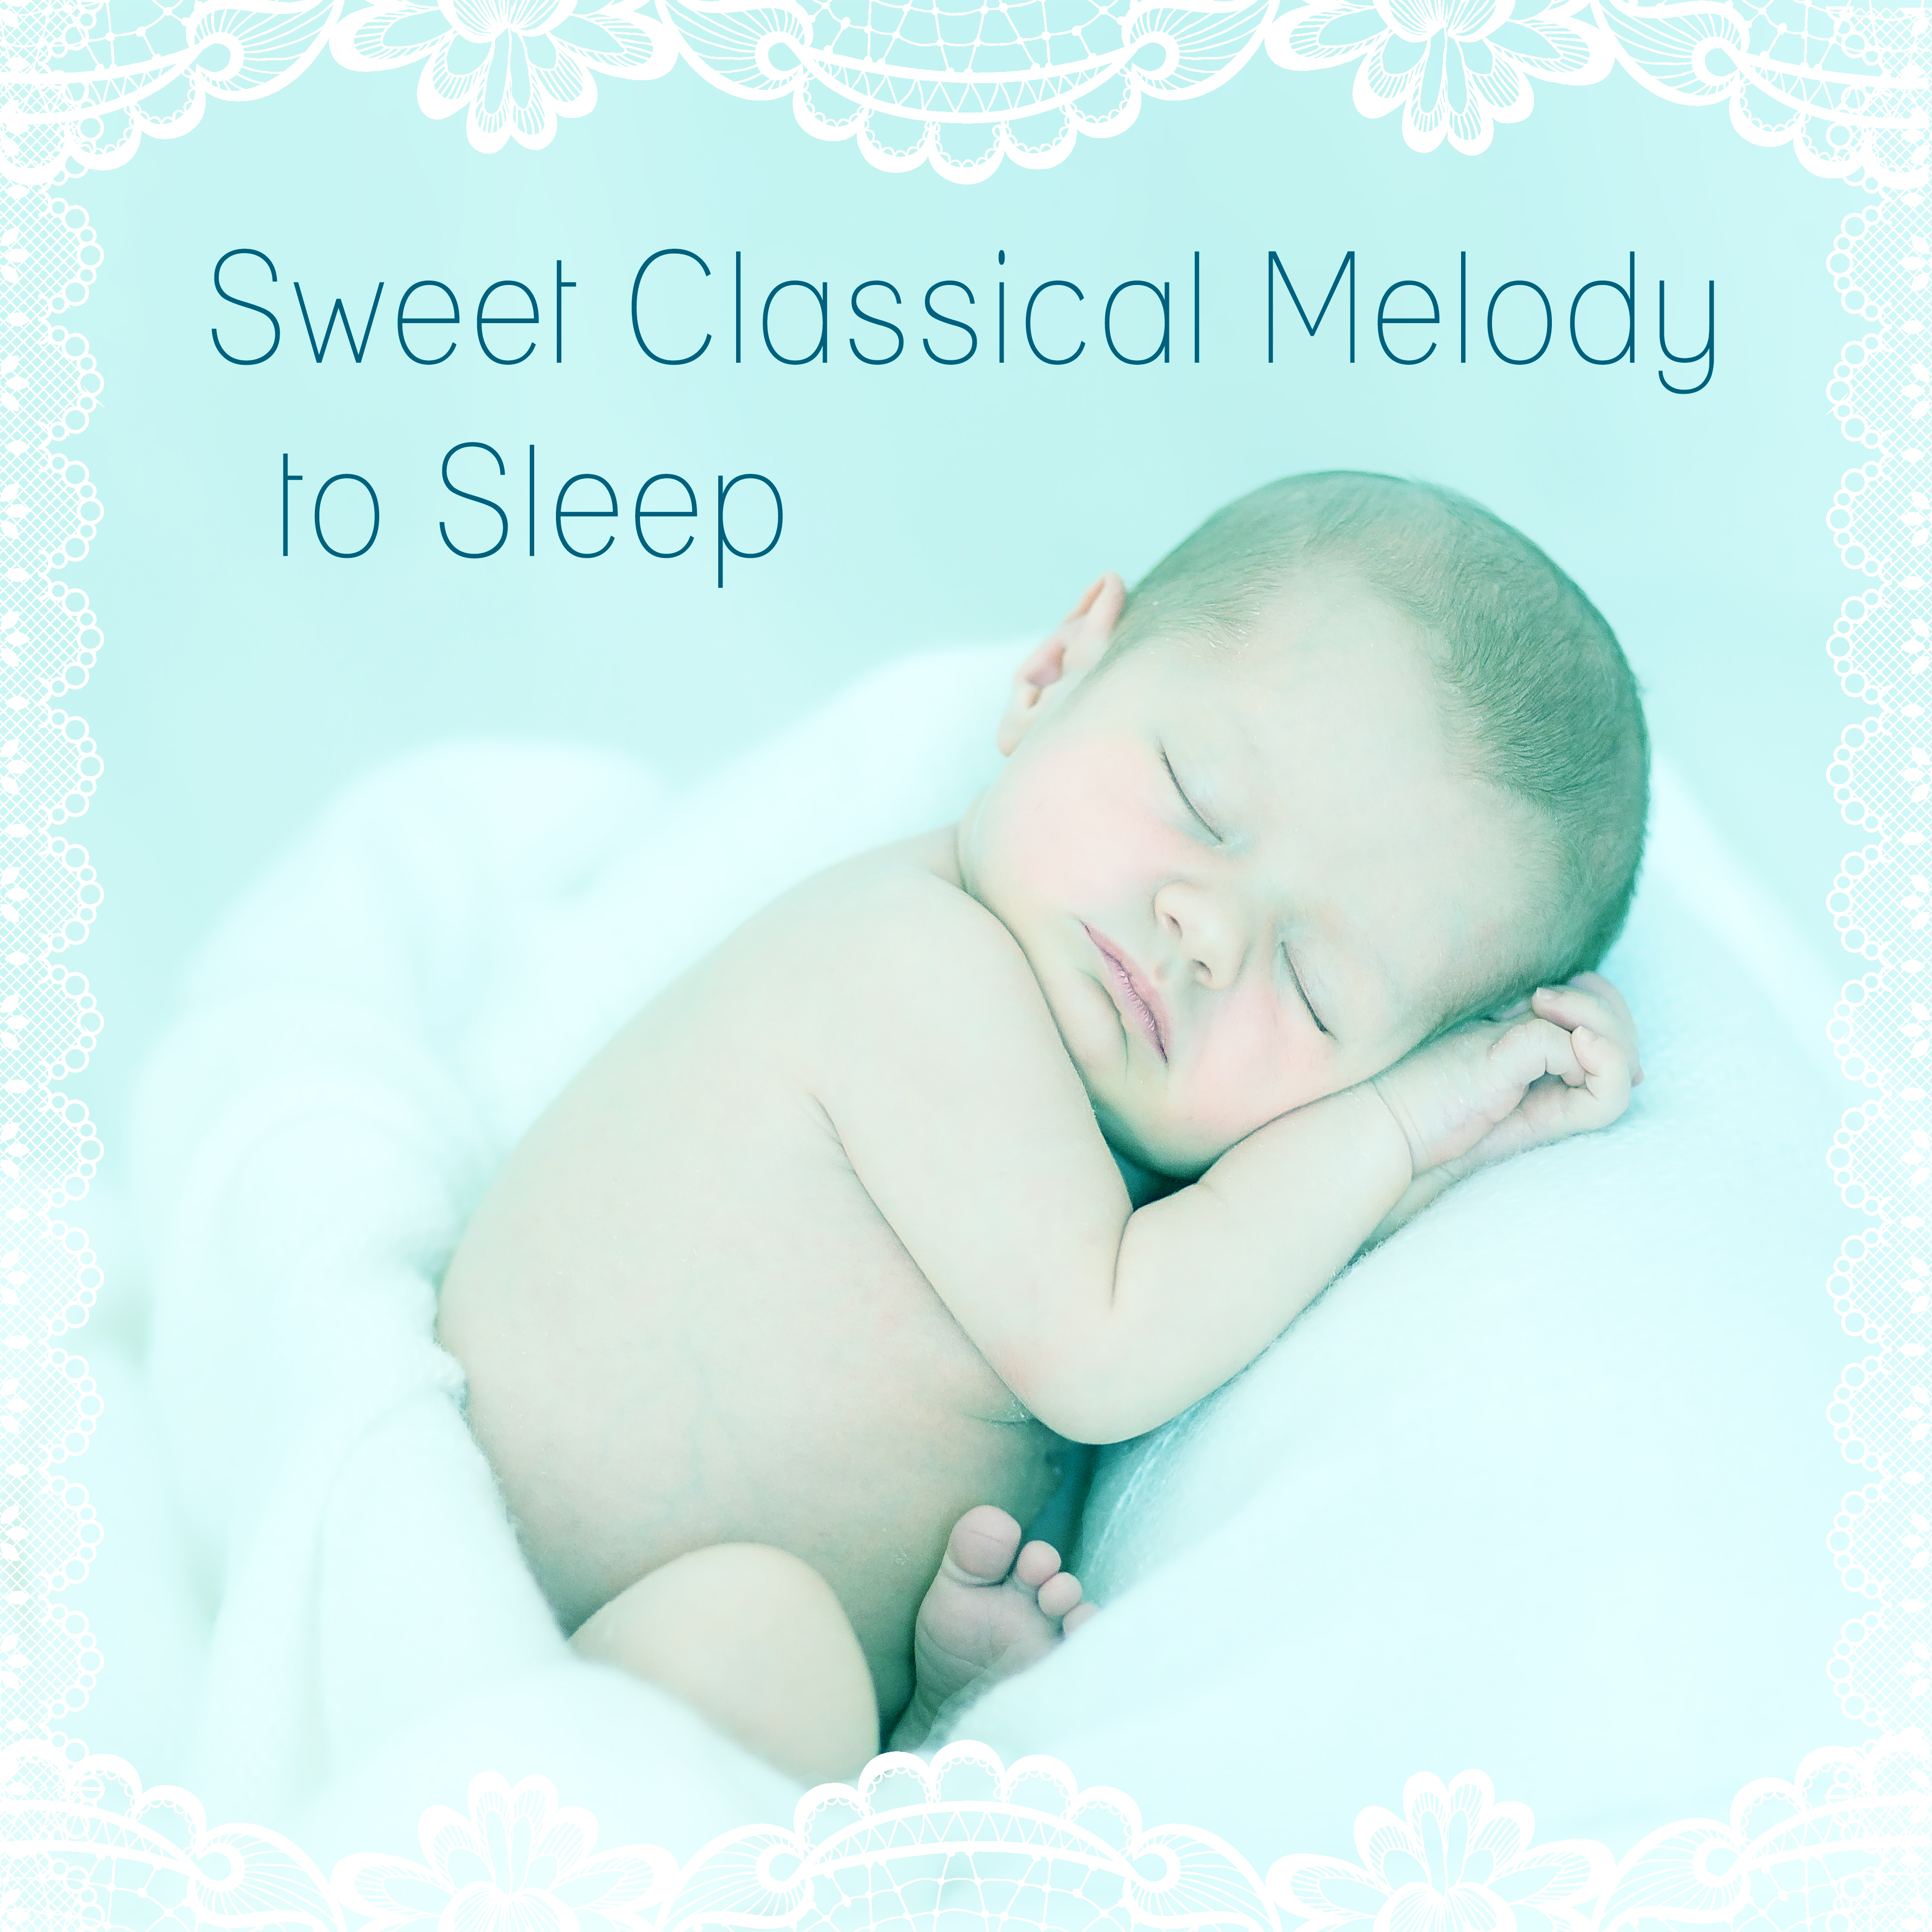 Sweet Classical Melody to Sleep  Lullaby to Bed, Classical Lullabies, Mozart, Bach to Sleep